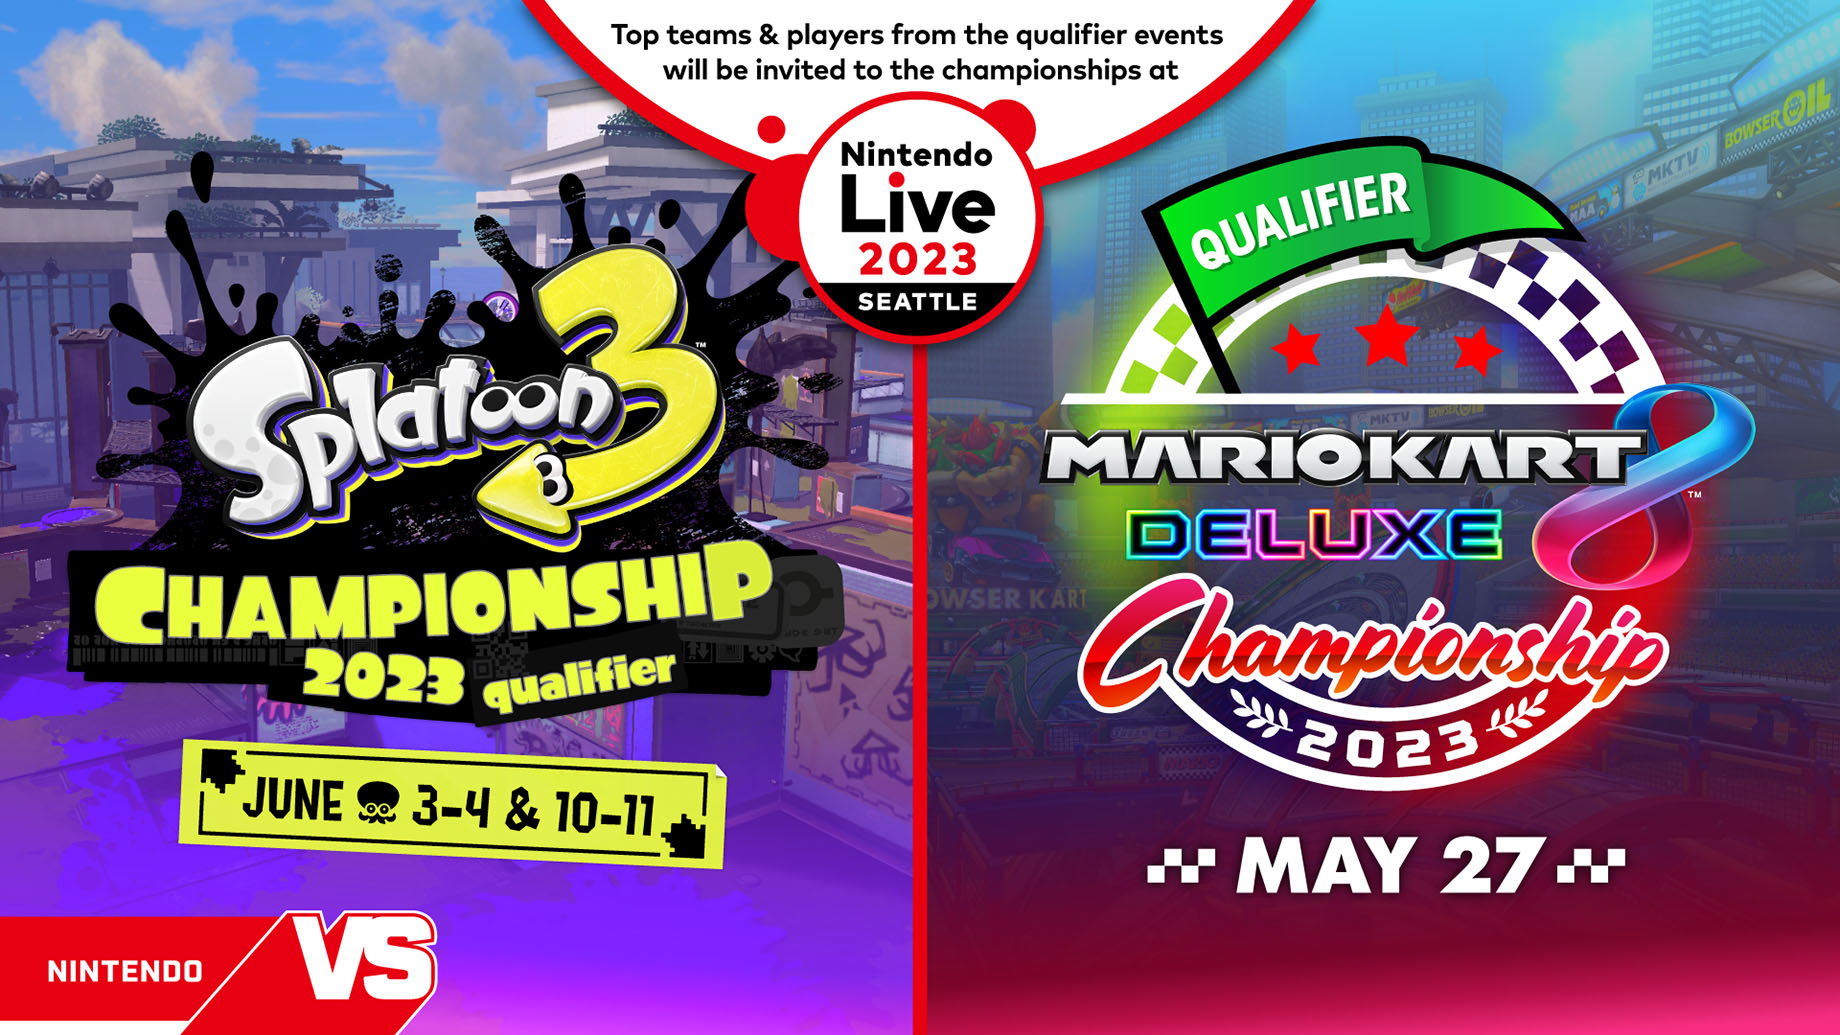 Splatoon 3 Championship and Mario Kart 8 Deluxe Championship logos and dates